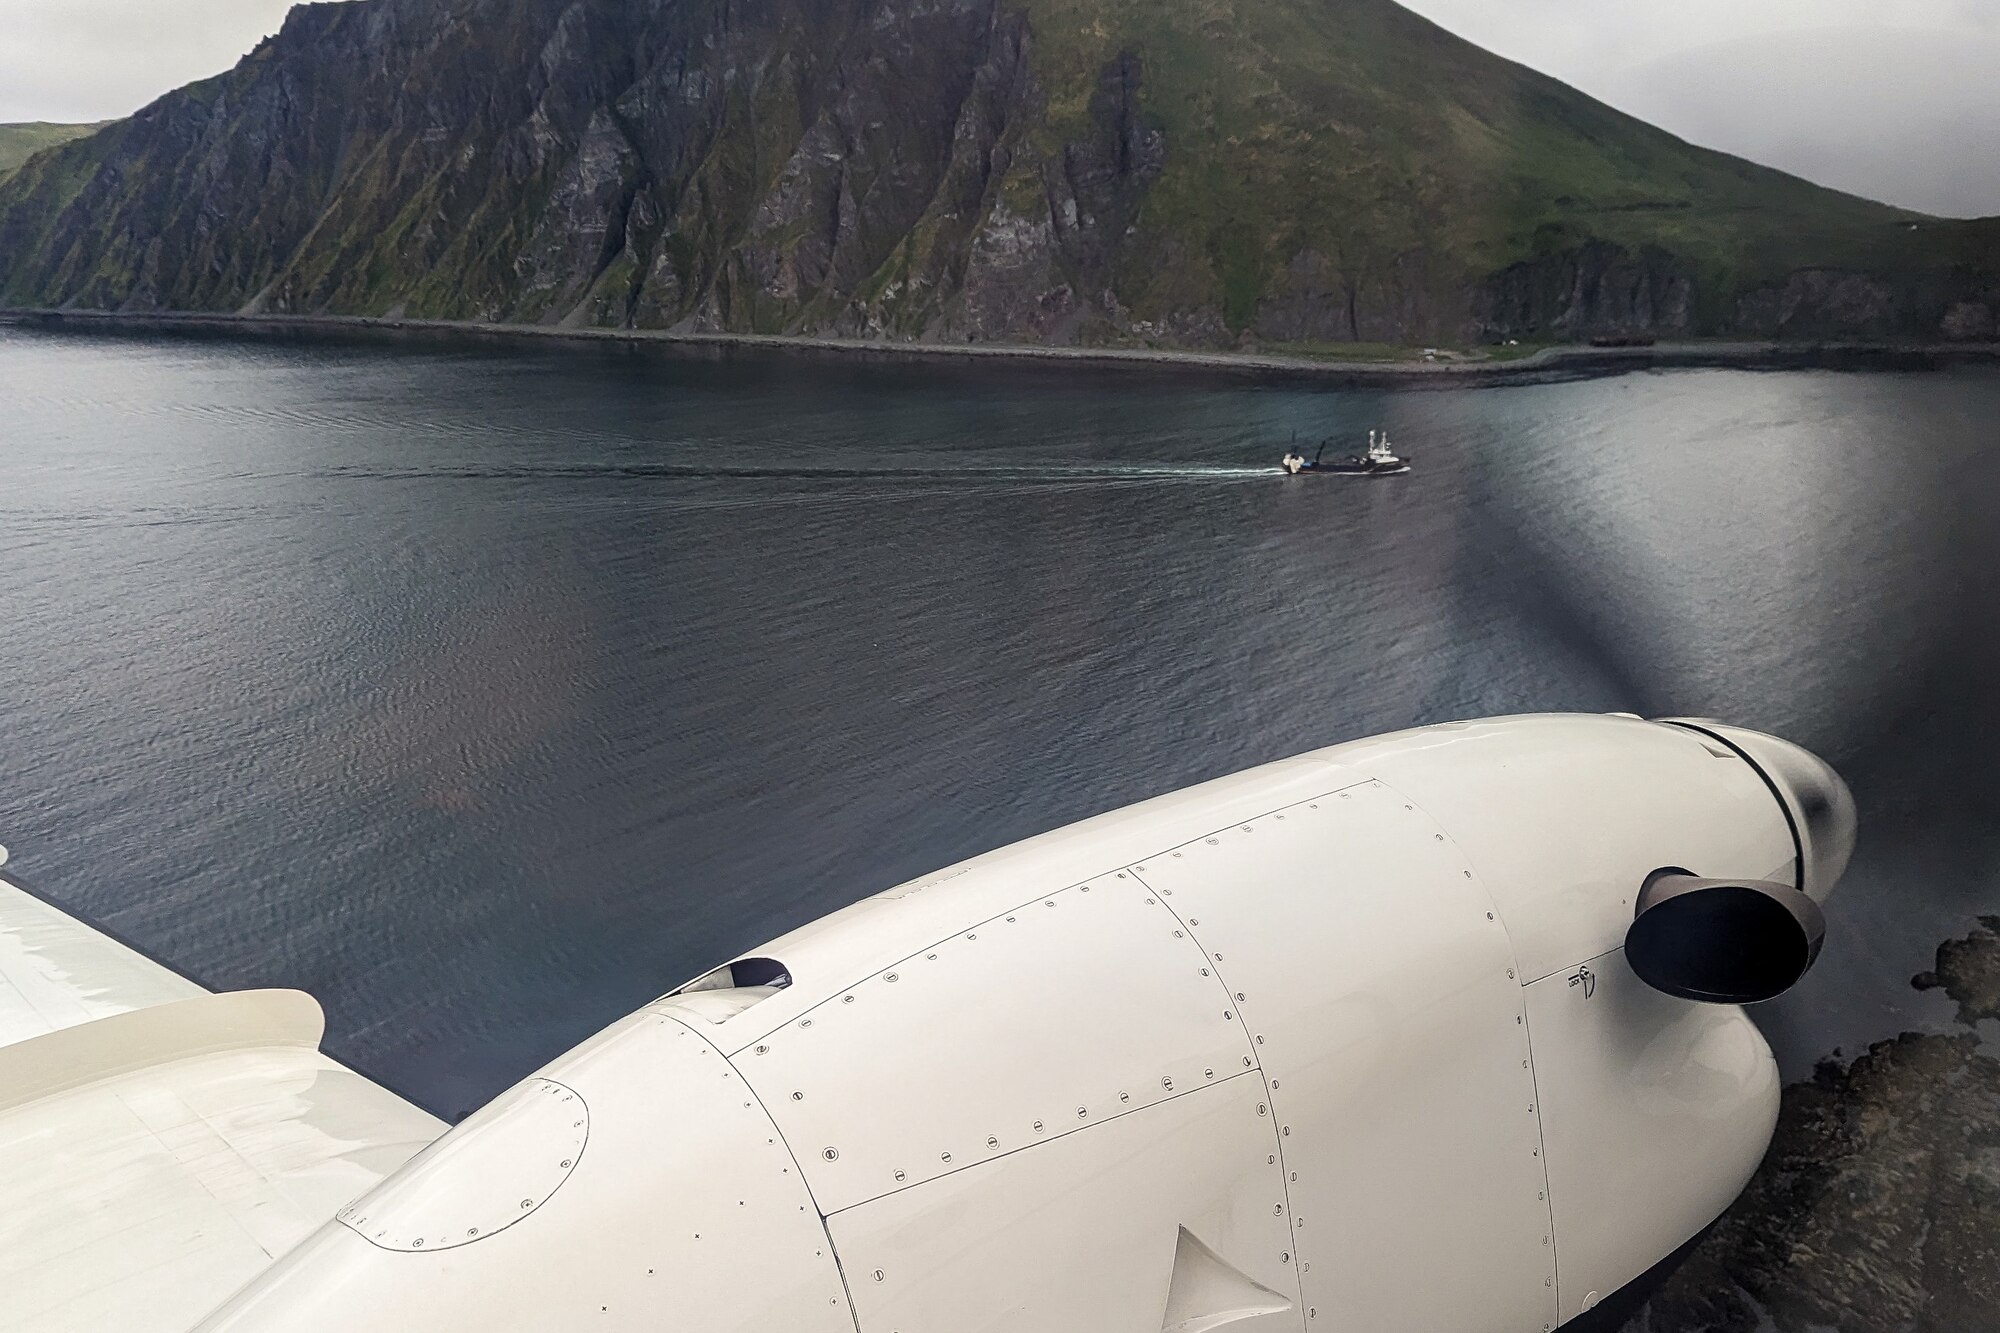 A photo of a C-12J Huron flying past a rocky island cliff.